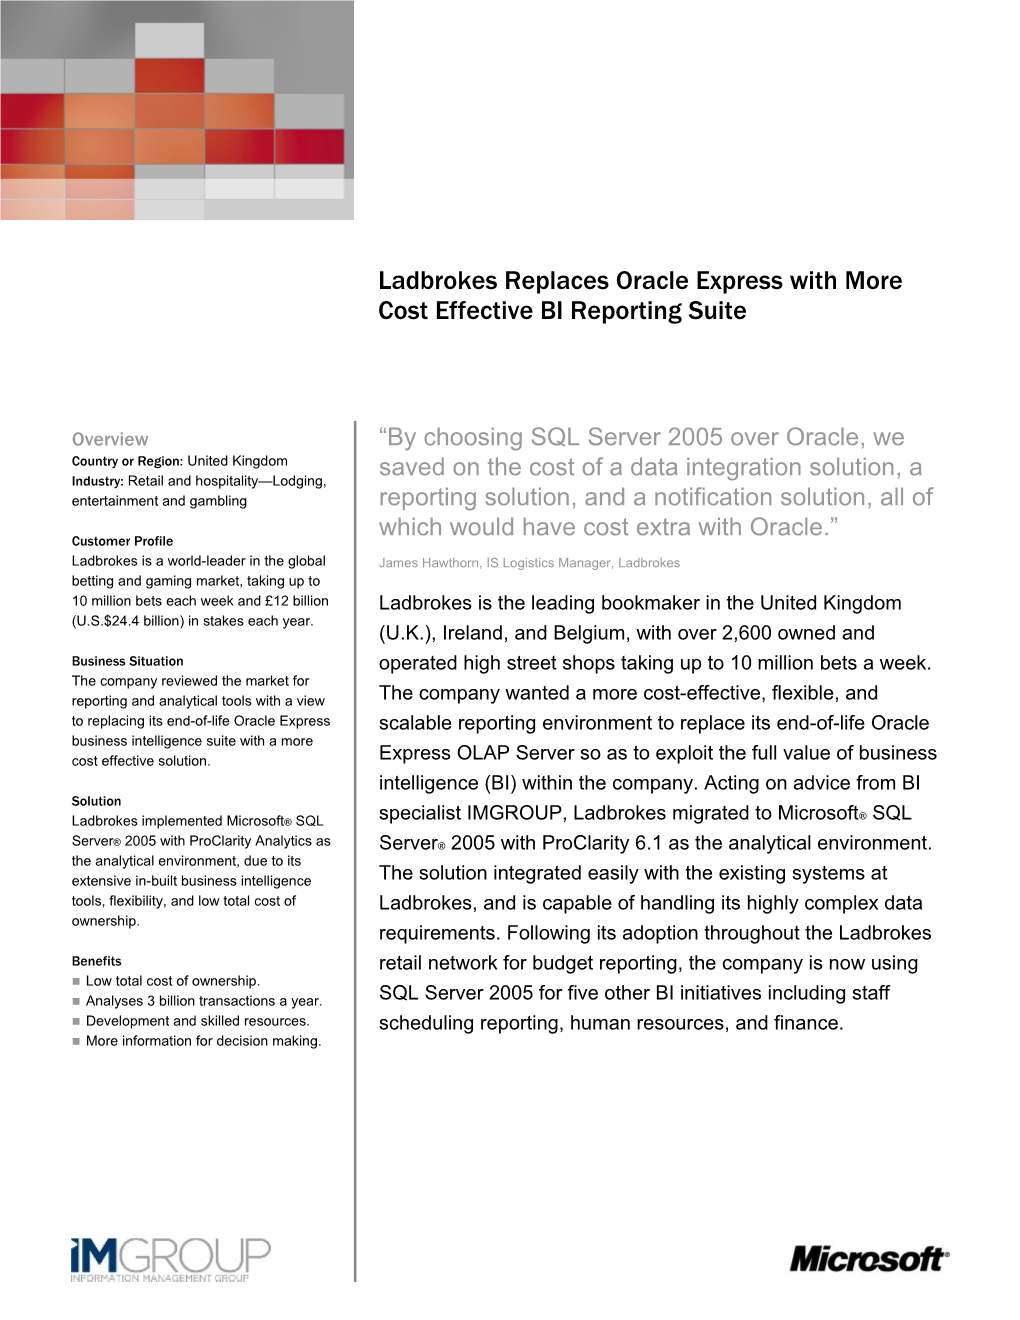 Writeimage CEP Ladbrokes Replaces Oracle Express with More Cost Effective BI Reporting Suite